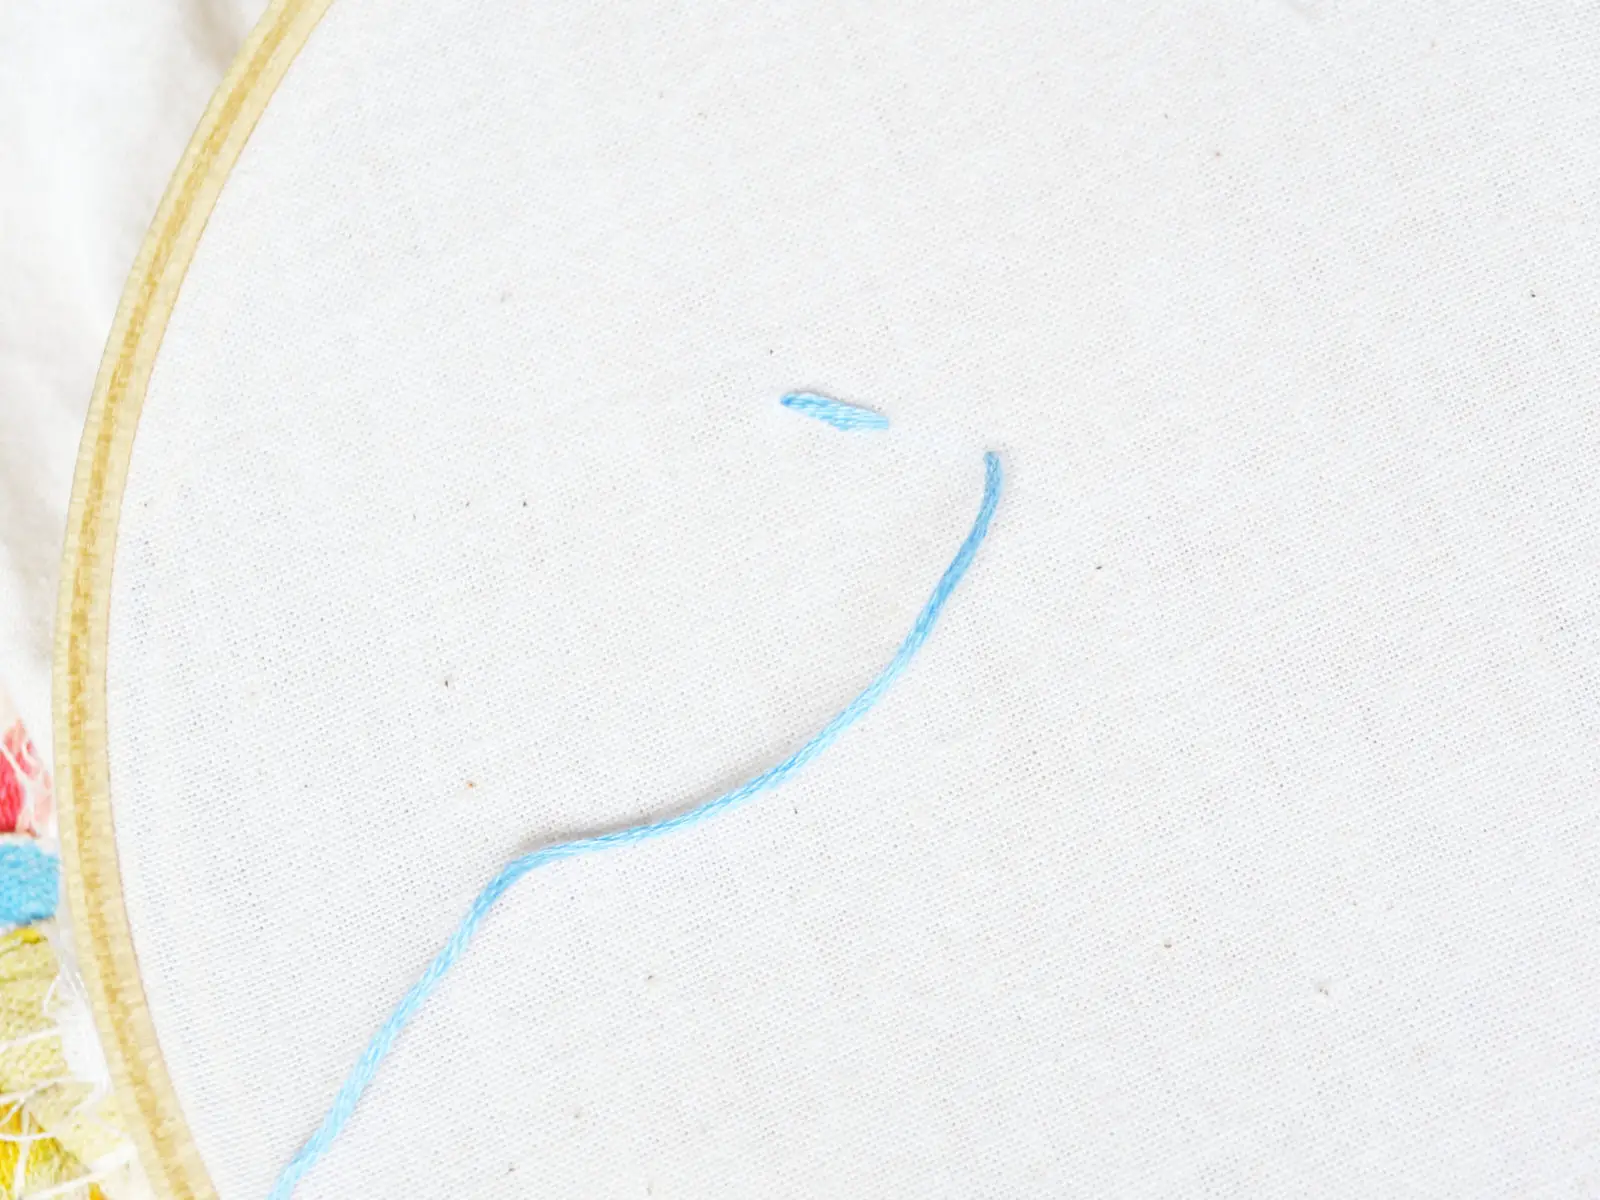 one completed running stitch in light blue floss